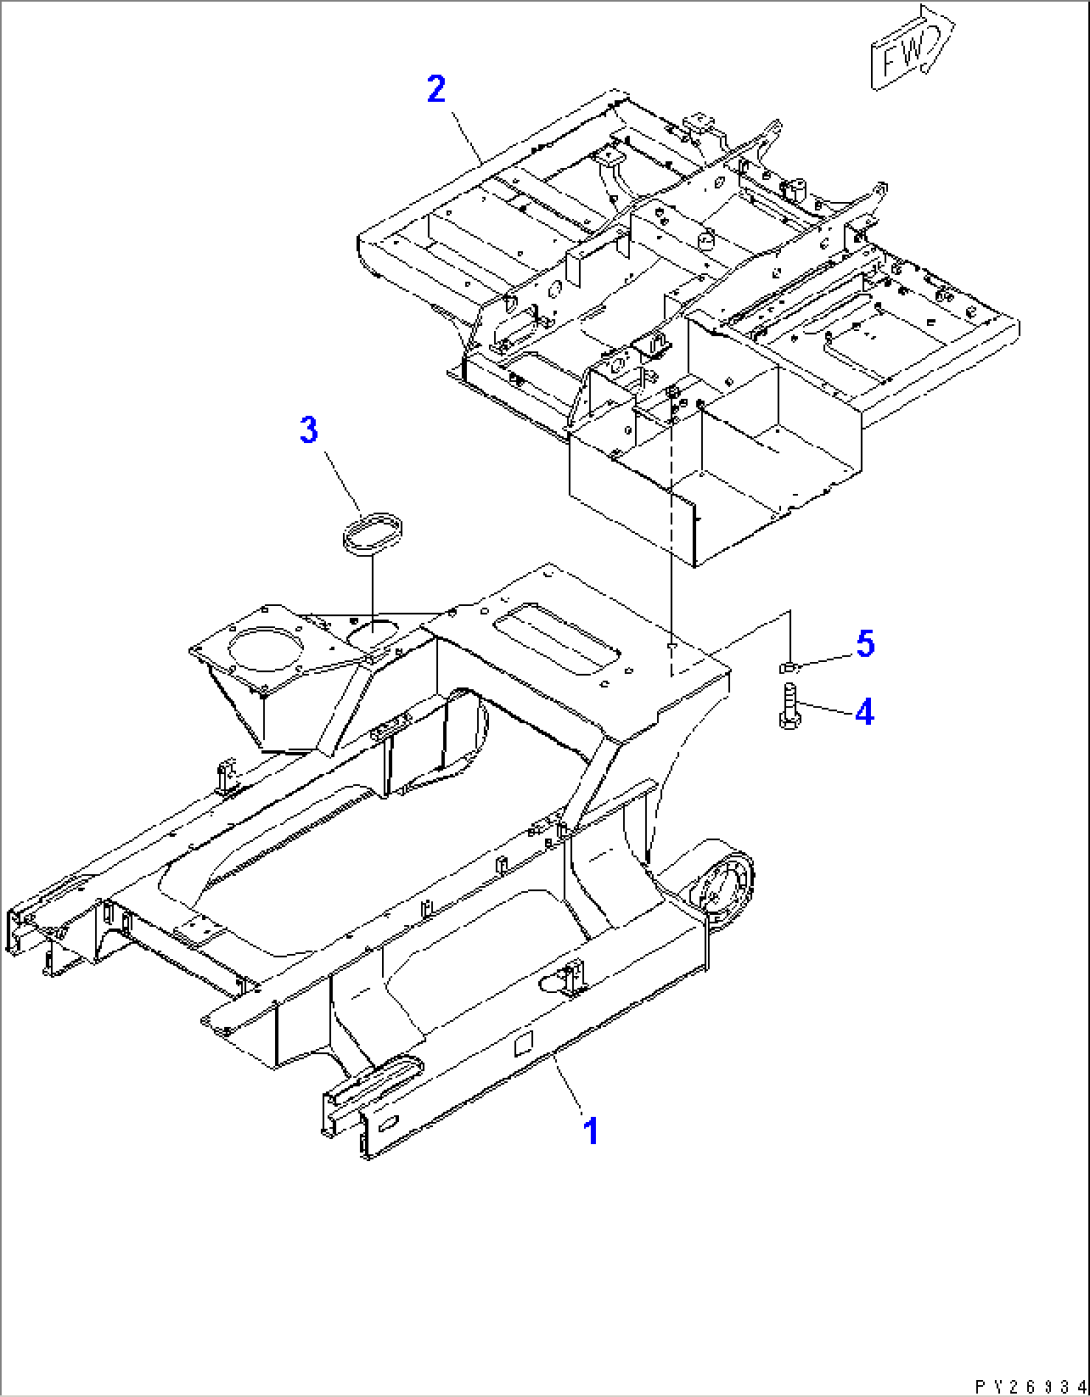 REAR FRAME RELATED PARTS